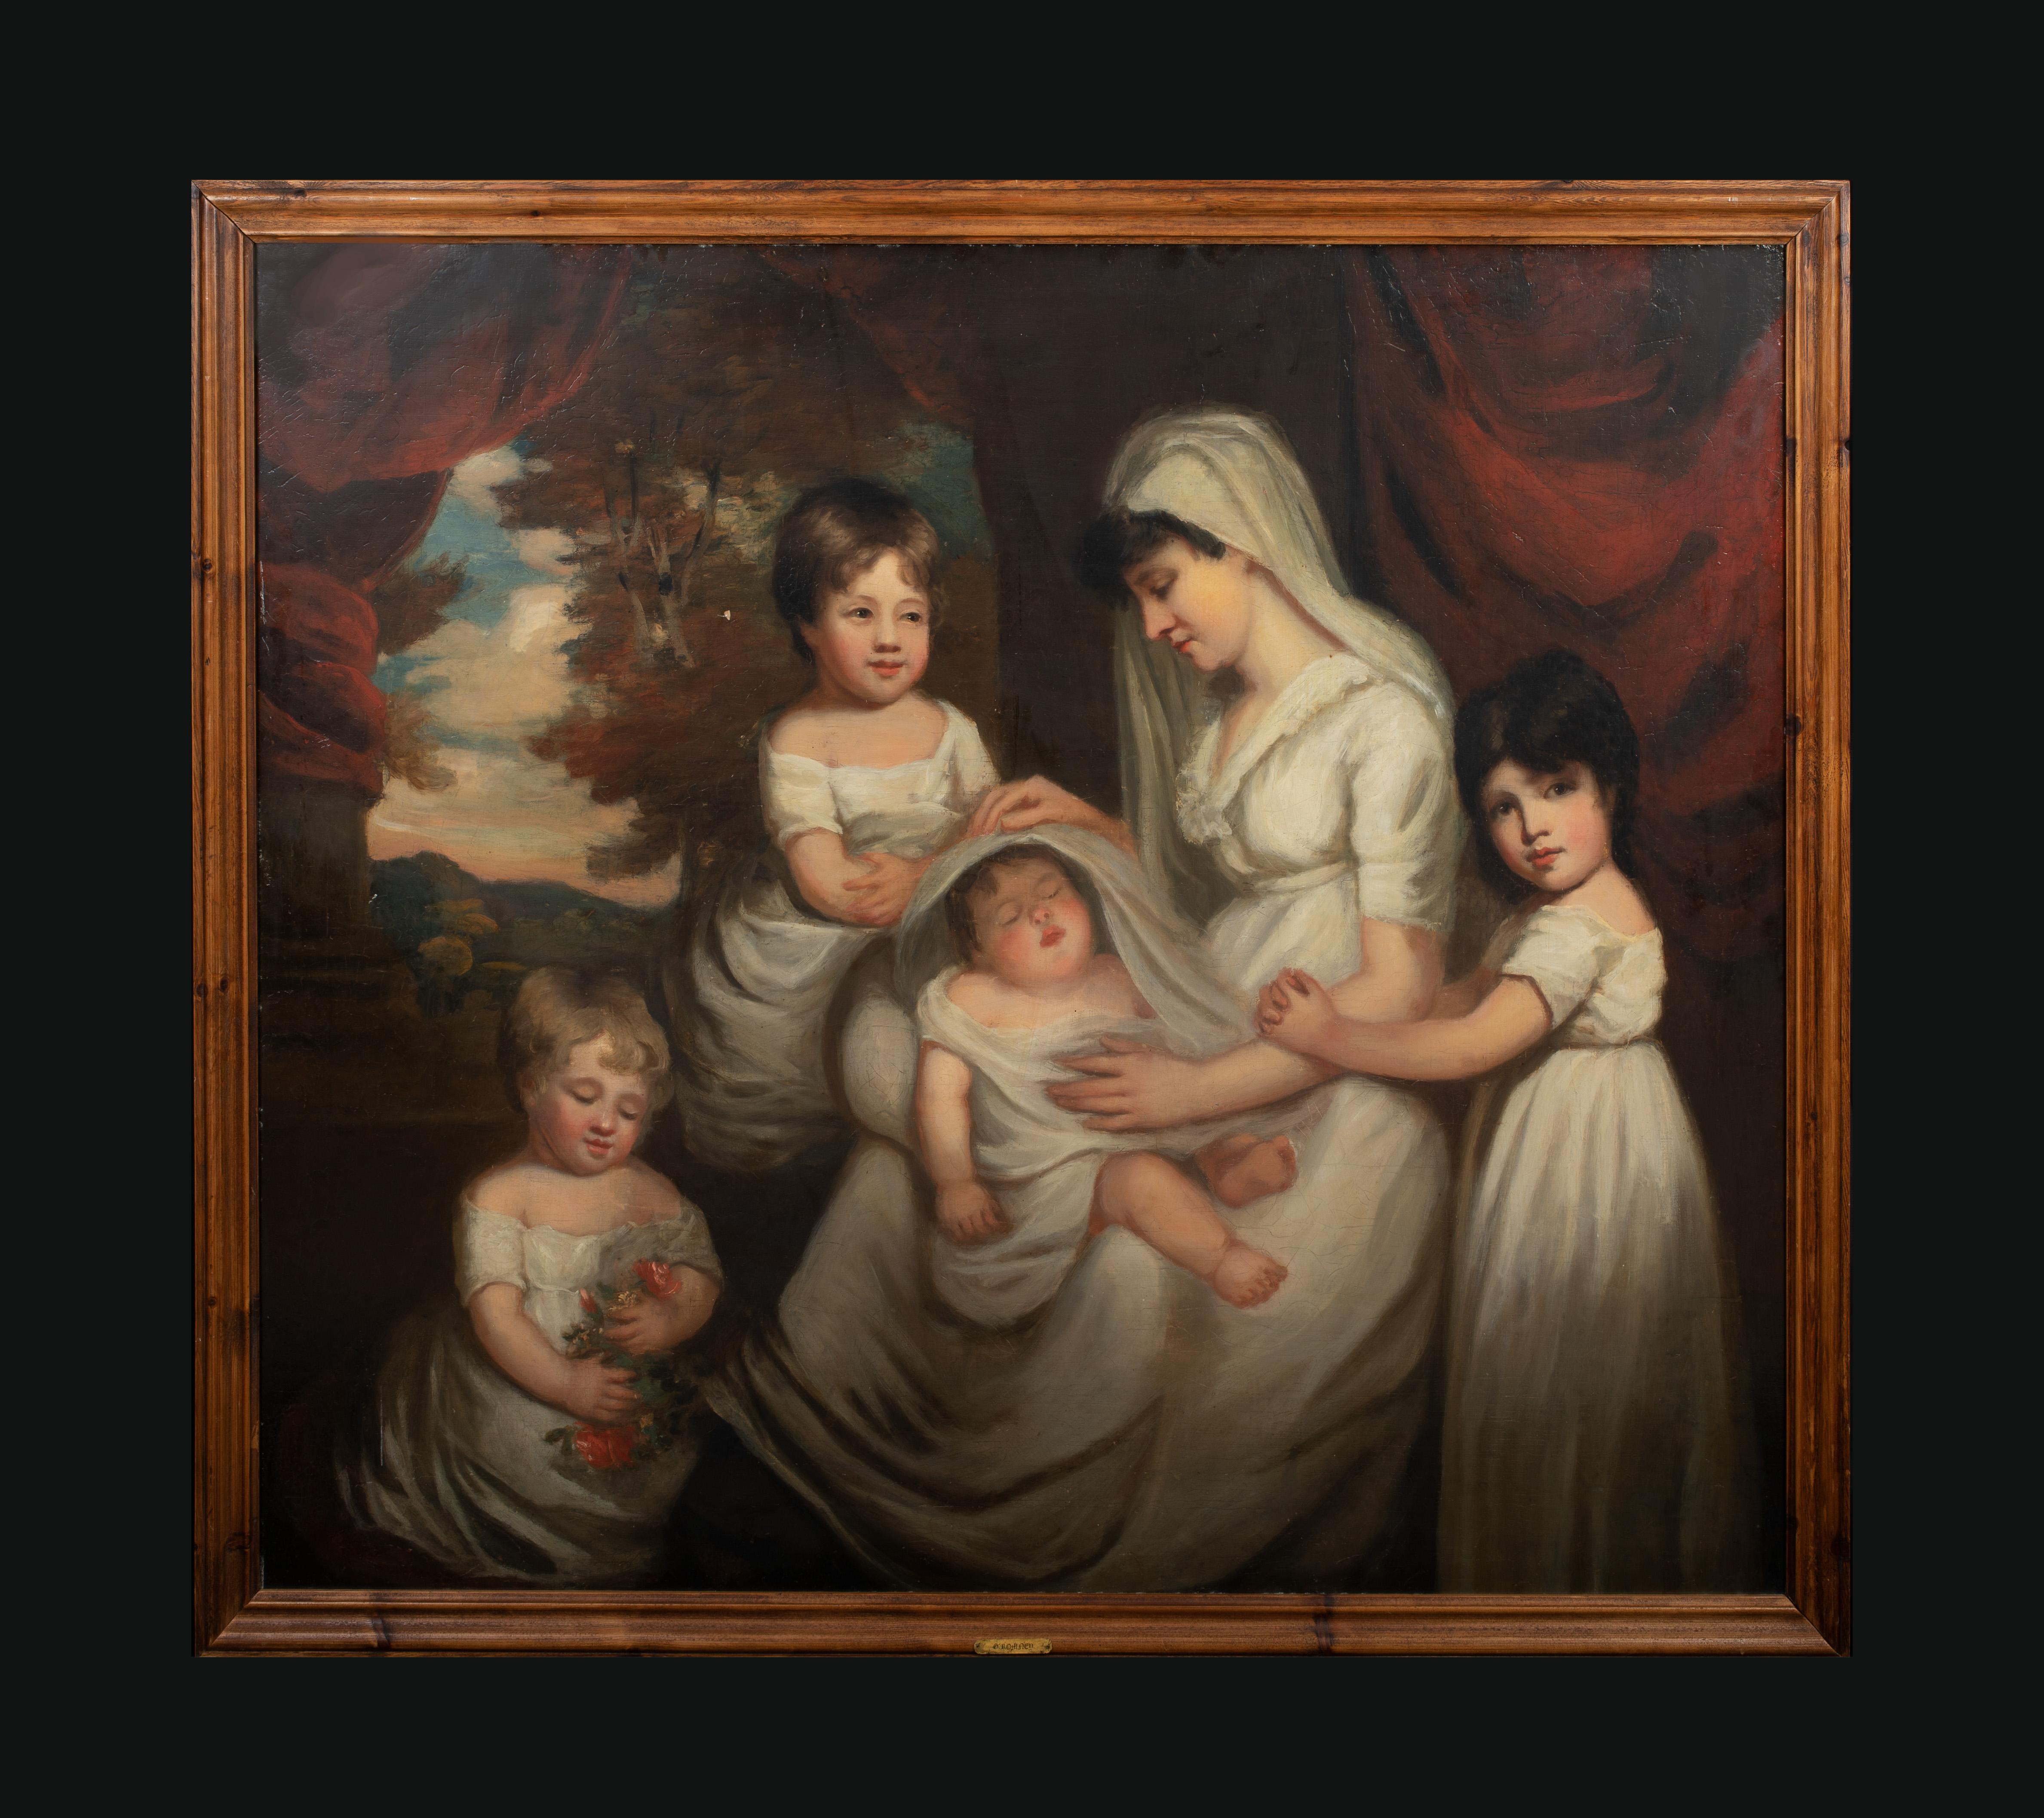 Family Portrait Of Mrs Spencer & Children, 18th Century - Painting by Sir William Beechey